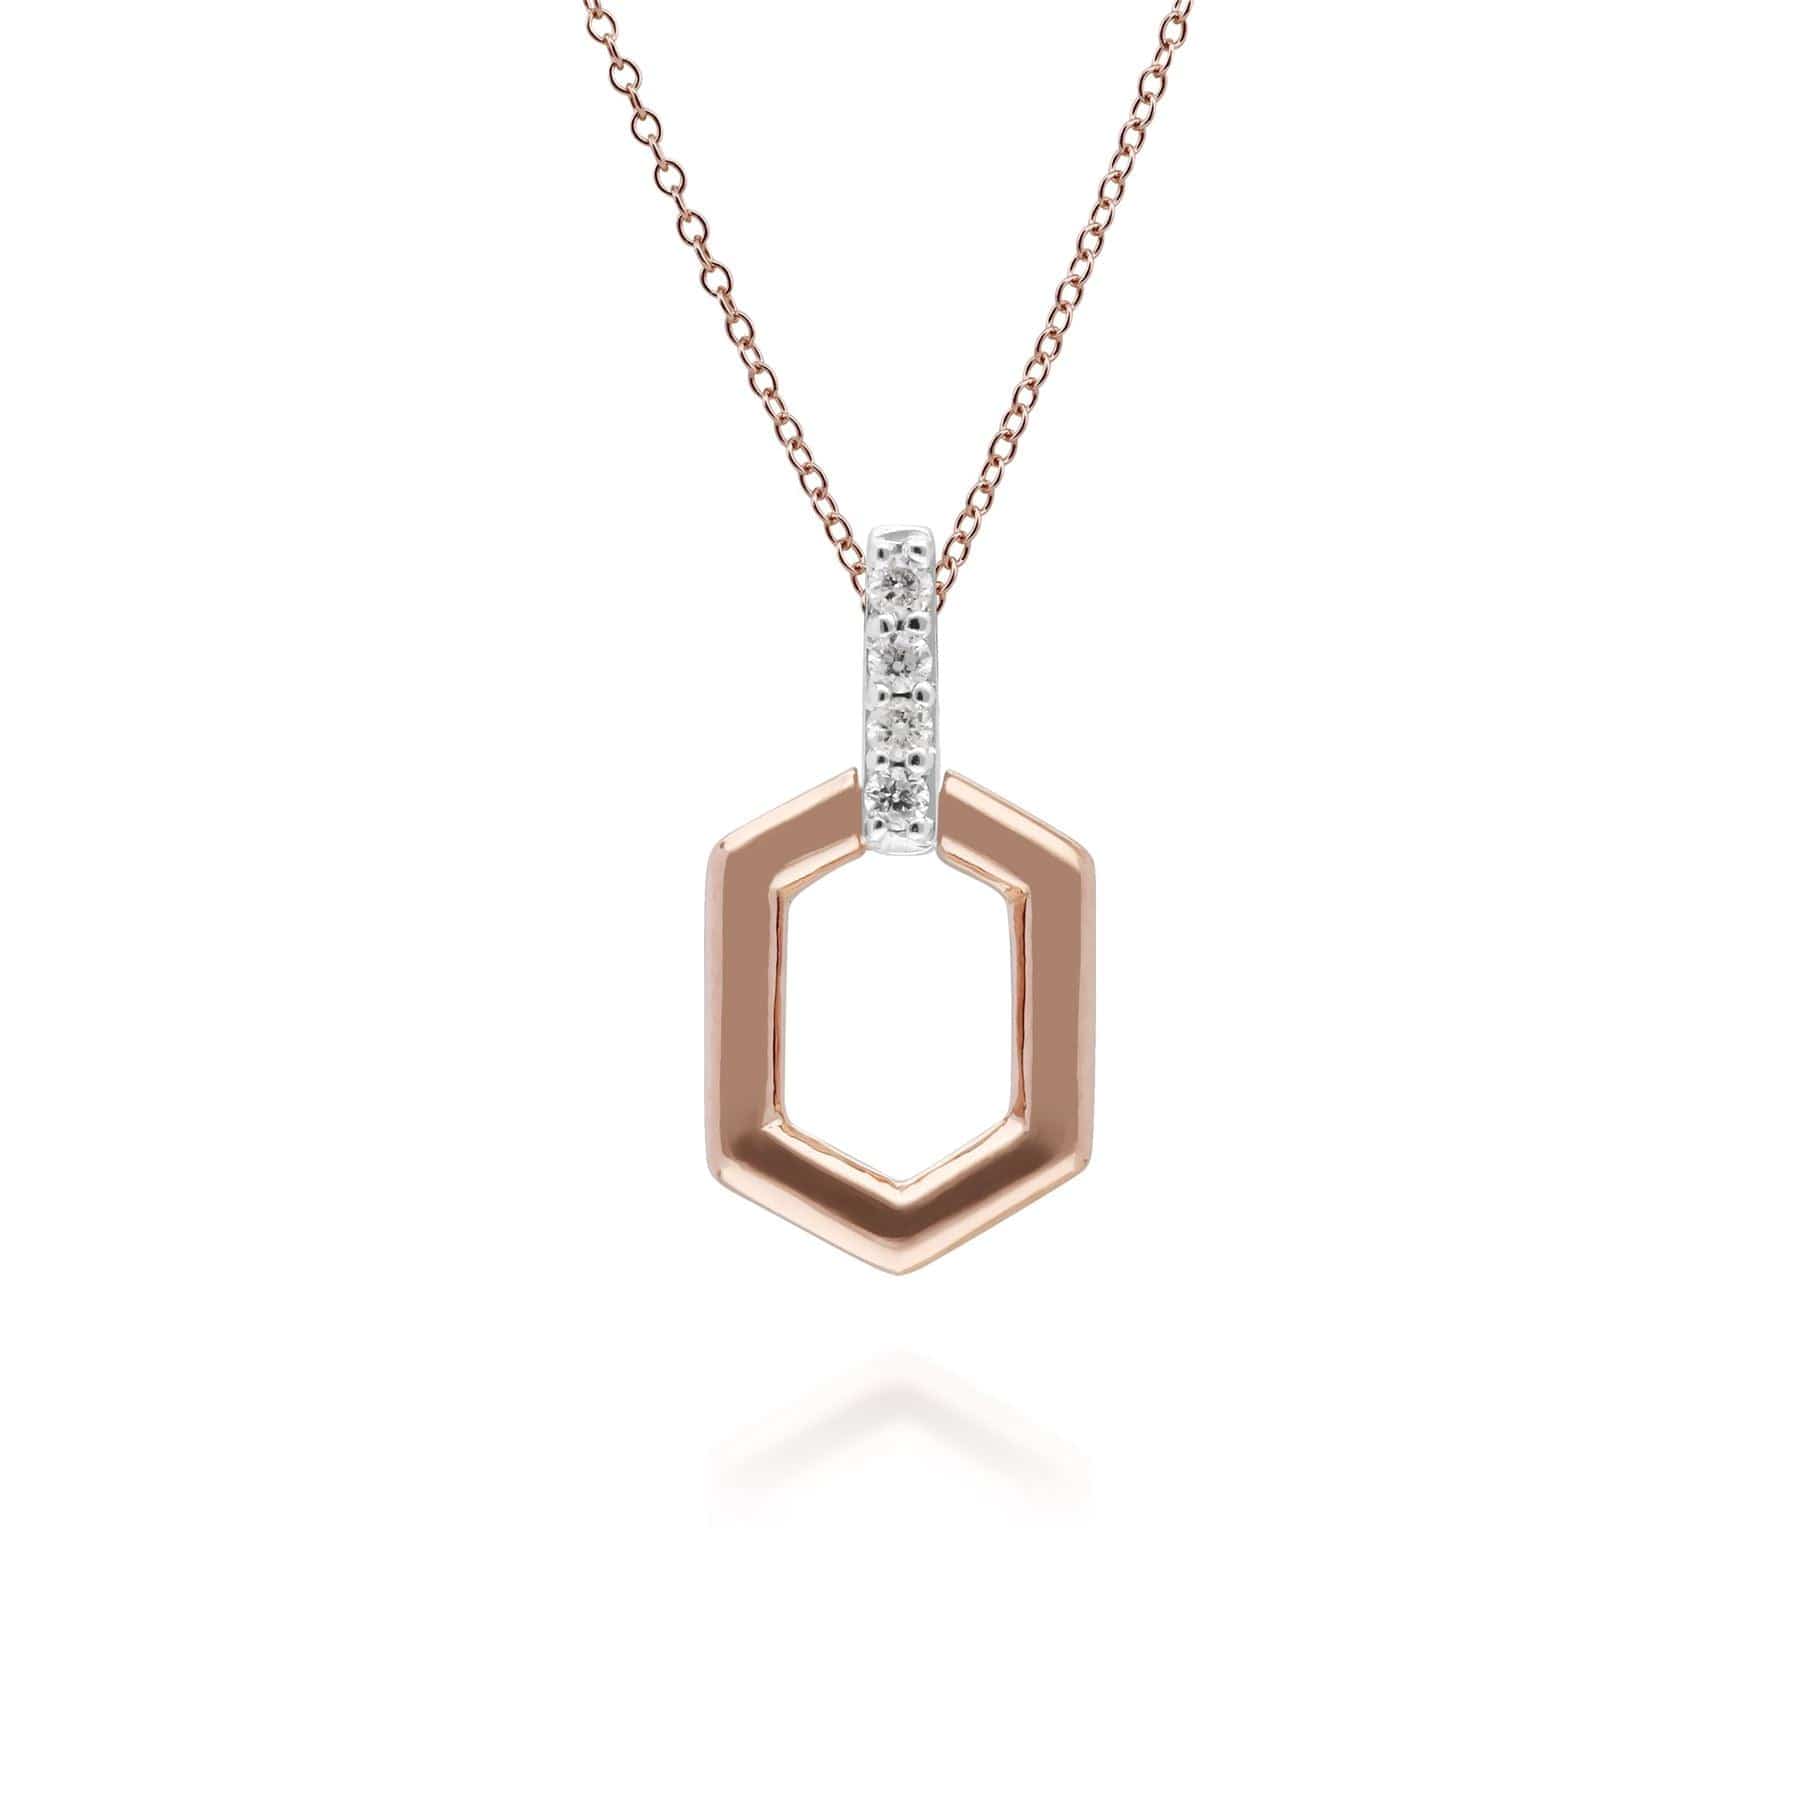 Diamond Pave Hex Bar Pendant Necklace in 9ct Rose Gold